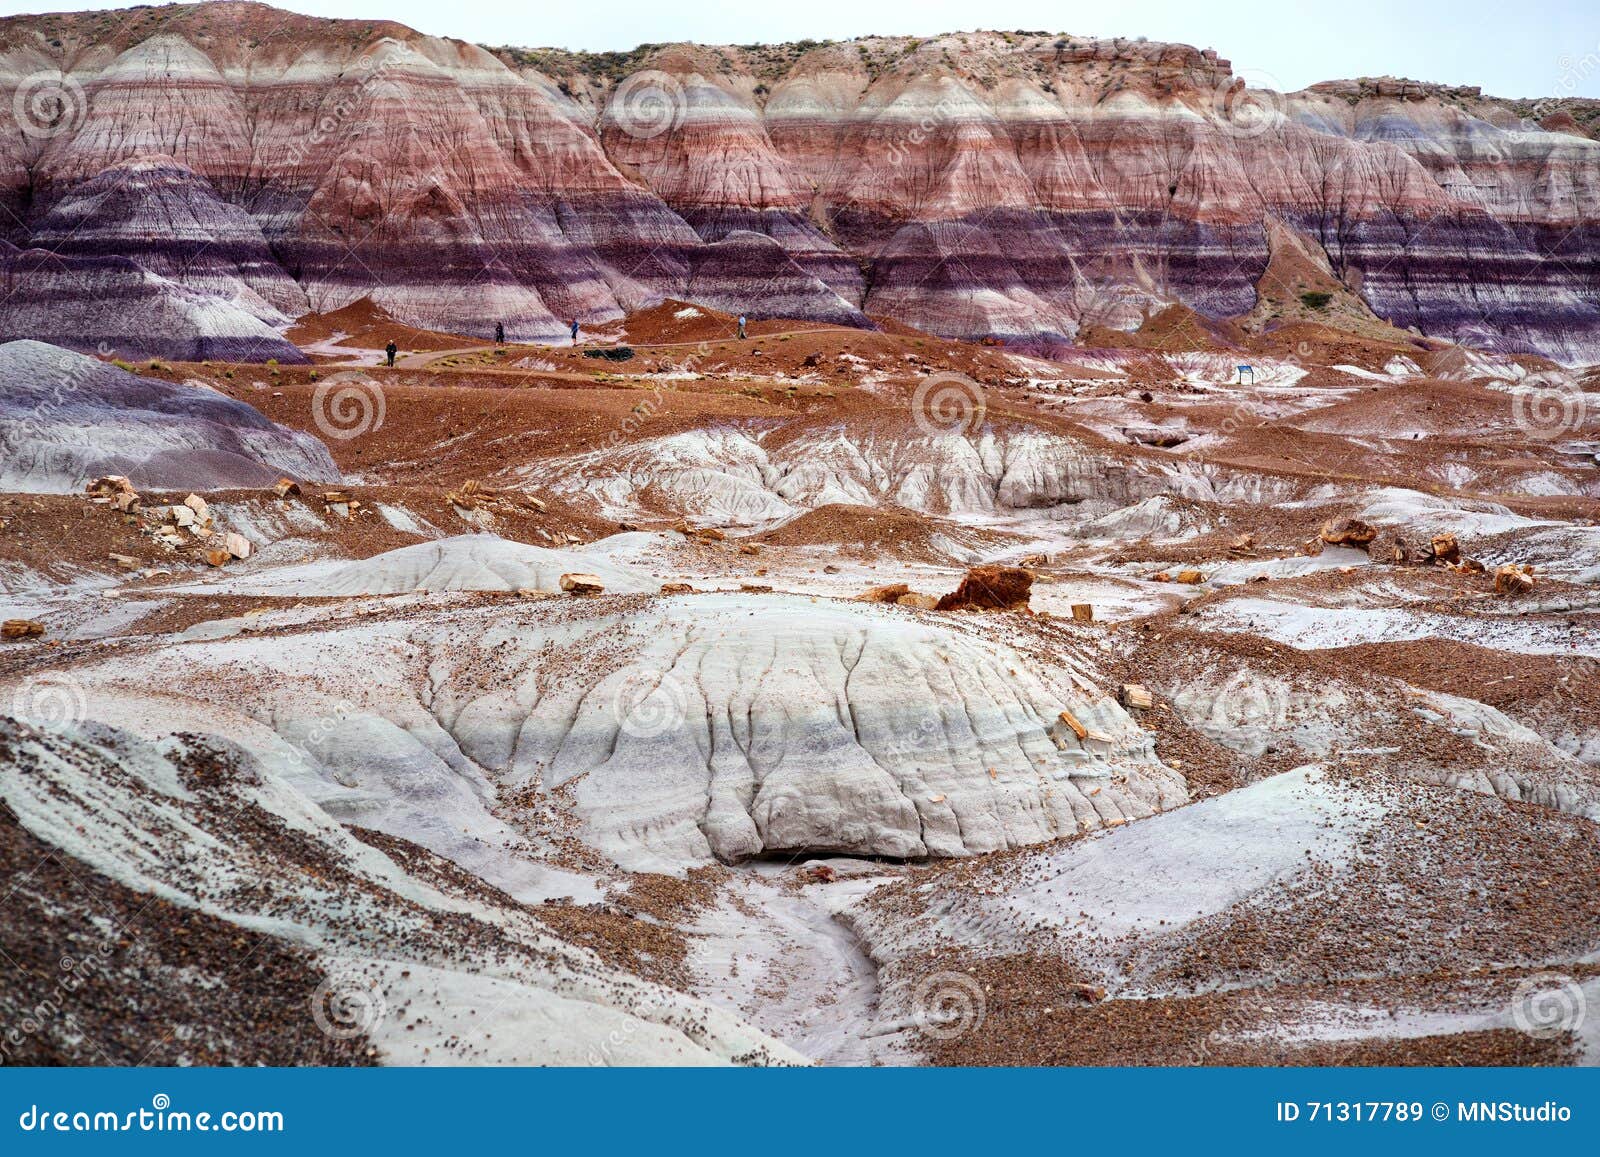 stunning striped purple sandstone formations of blue mesa badlands in petrified forest national park